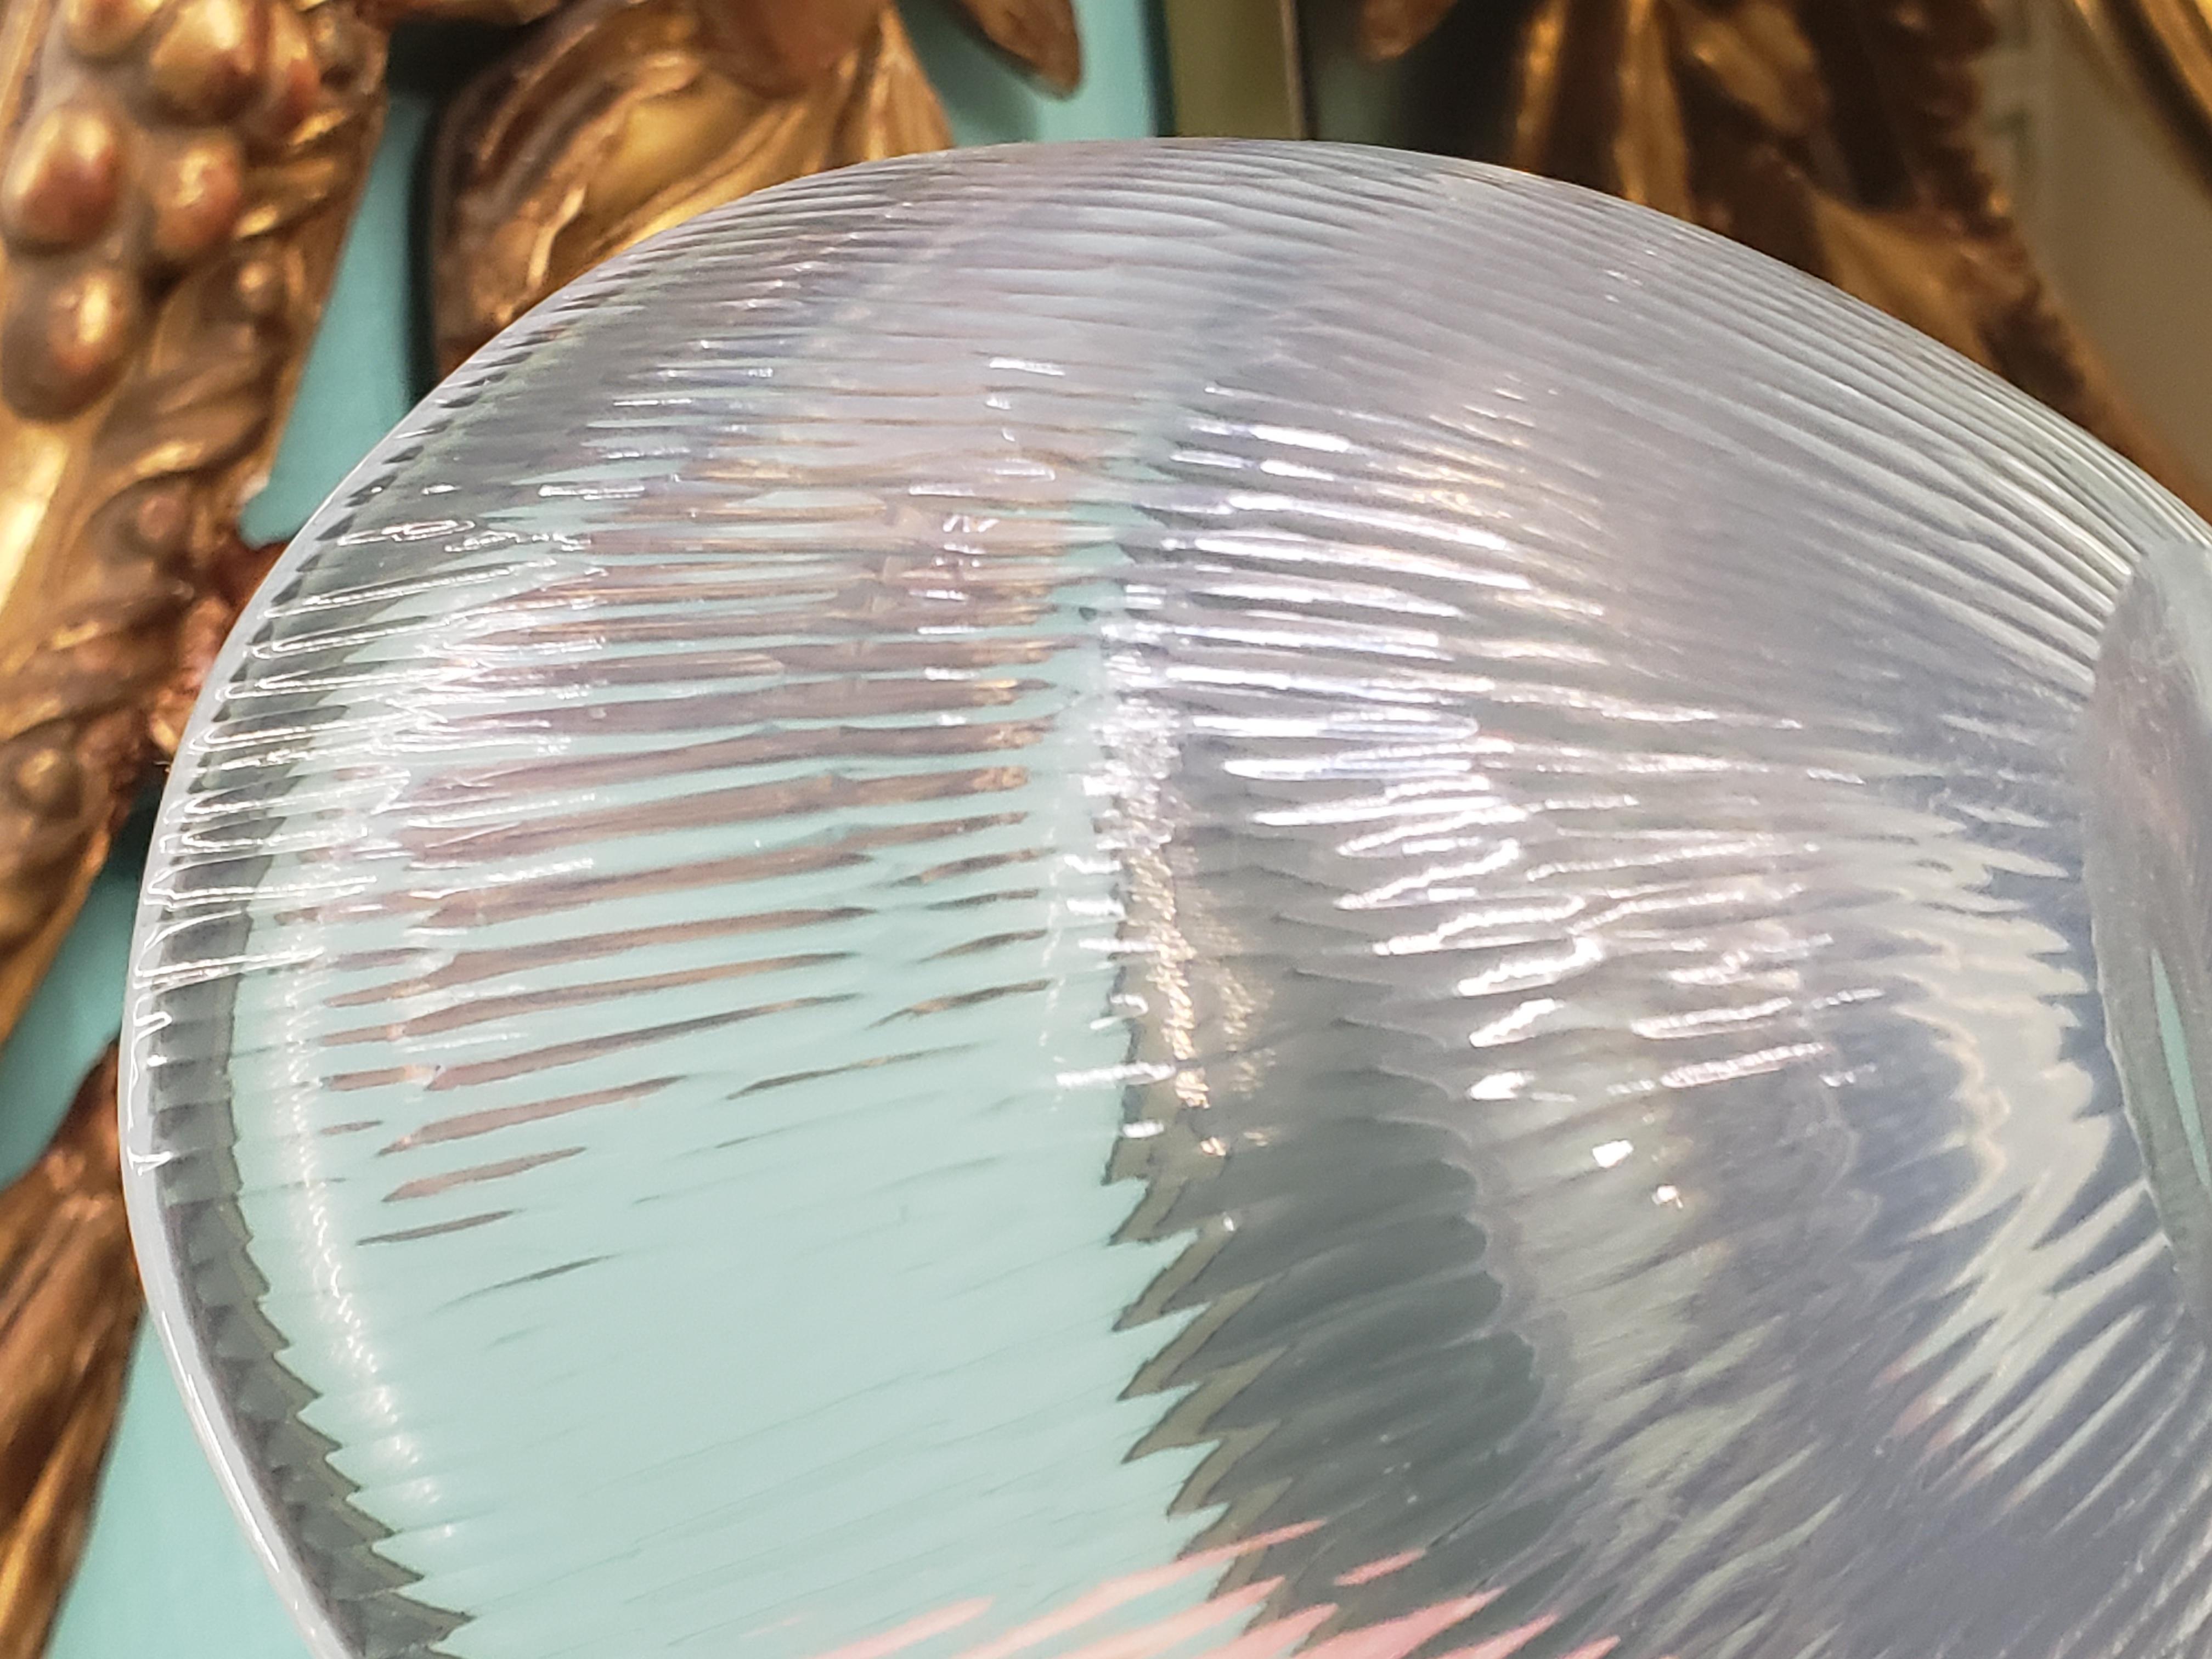 I've never seen one of these before, it's a chiselled glass
or battuto bowl in opalescent glass in a shape commonly referred to as a Selena bowl but it must've been pretty rare as this is the only one in this style I can find. The bowl was designed